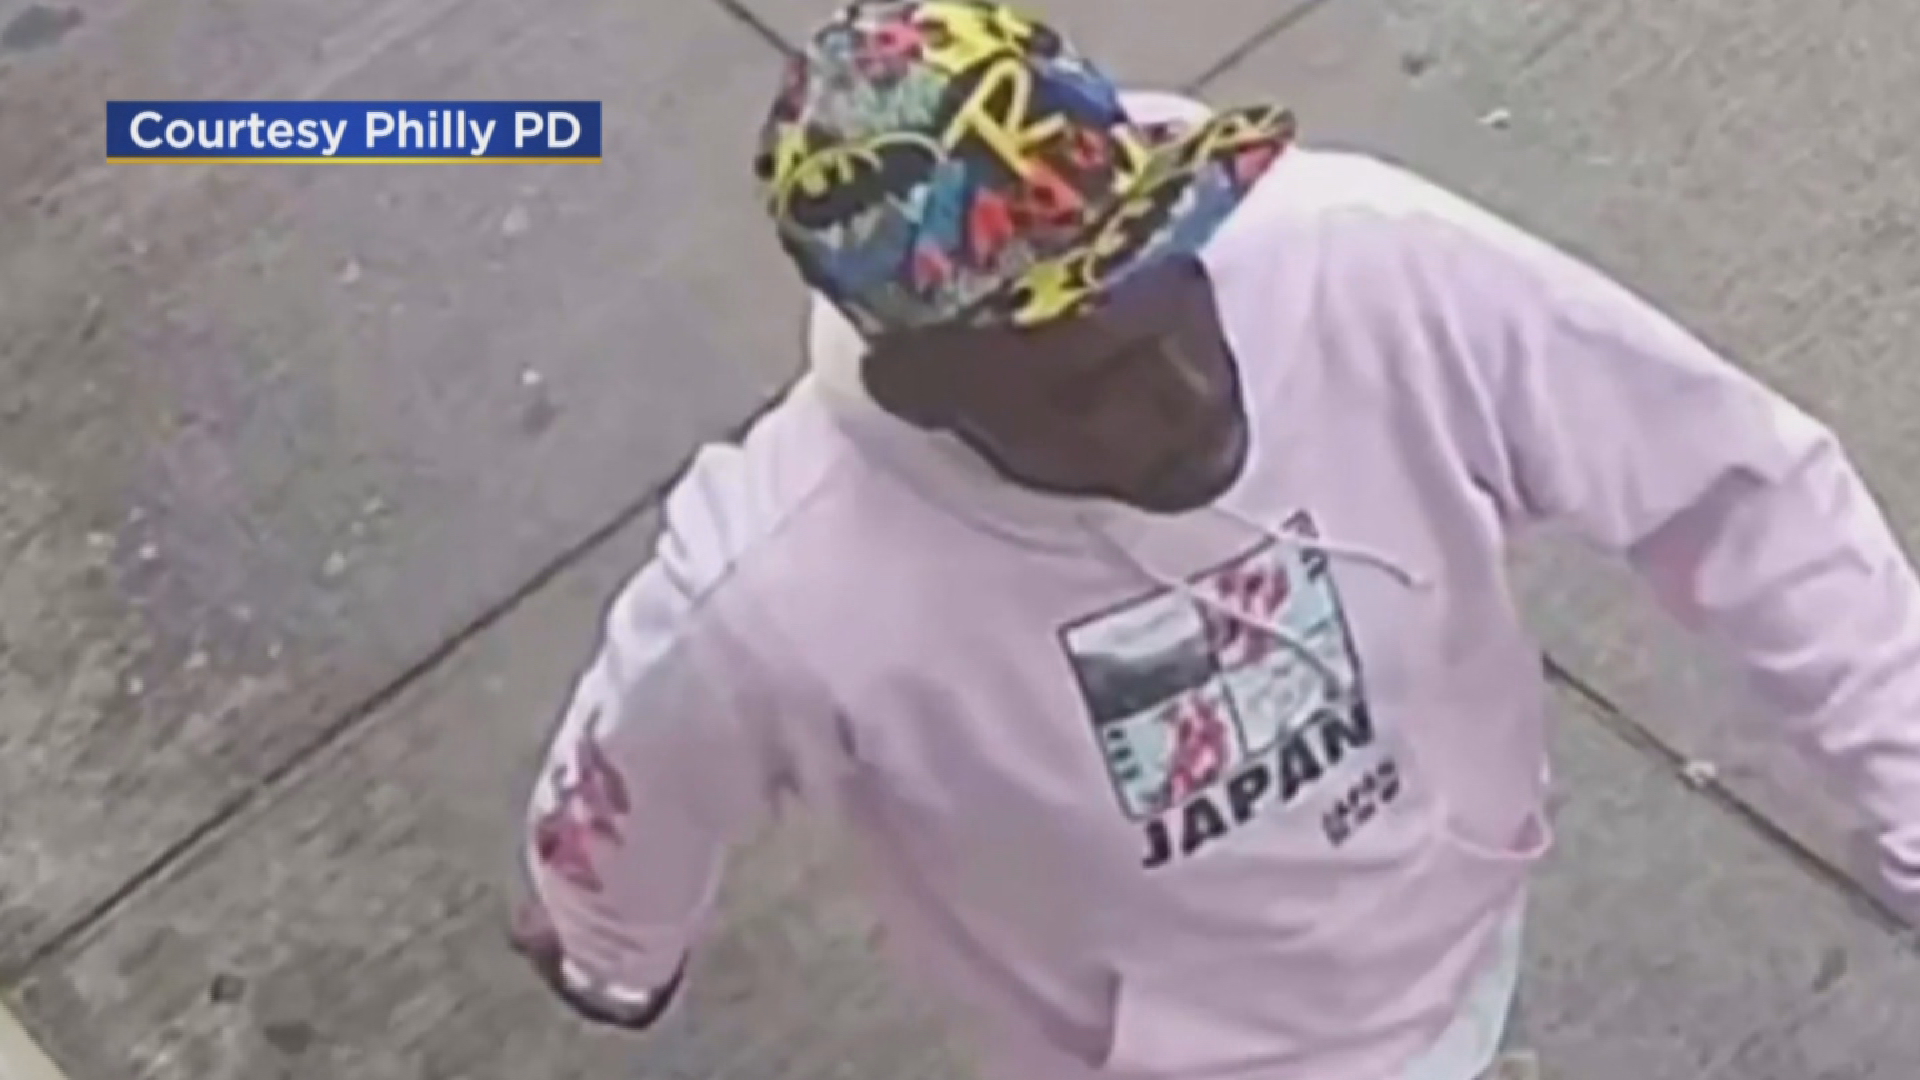 VIDEO: Philadelphia Police Asking For Public’s Help To Identify Suspect Accused Of Murder